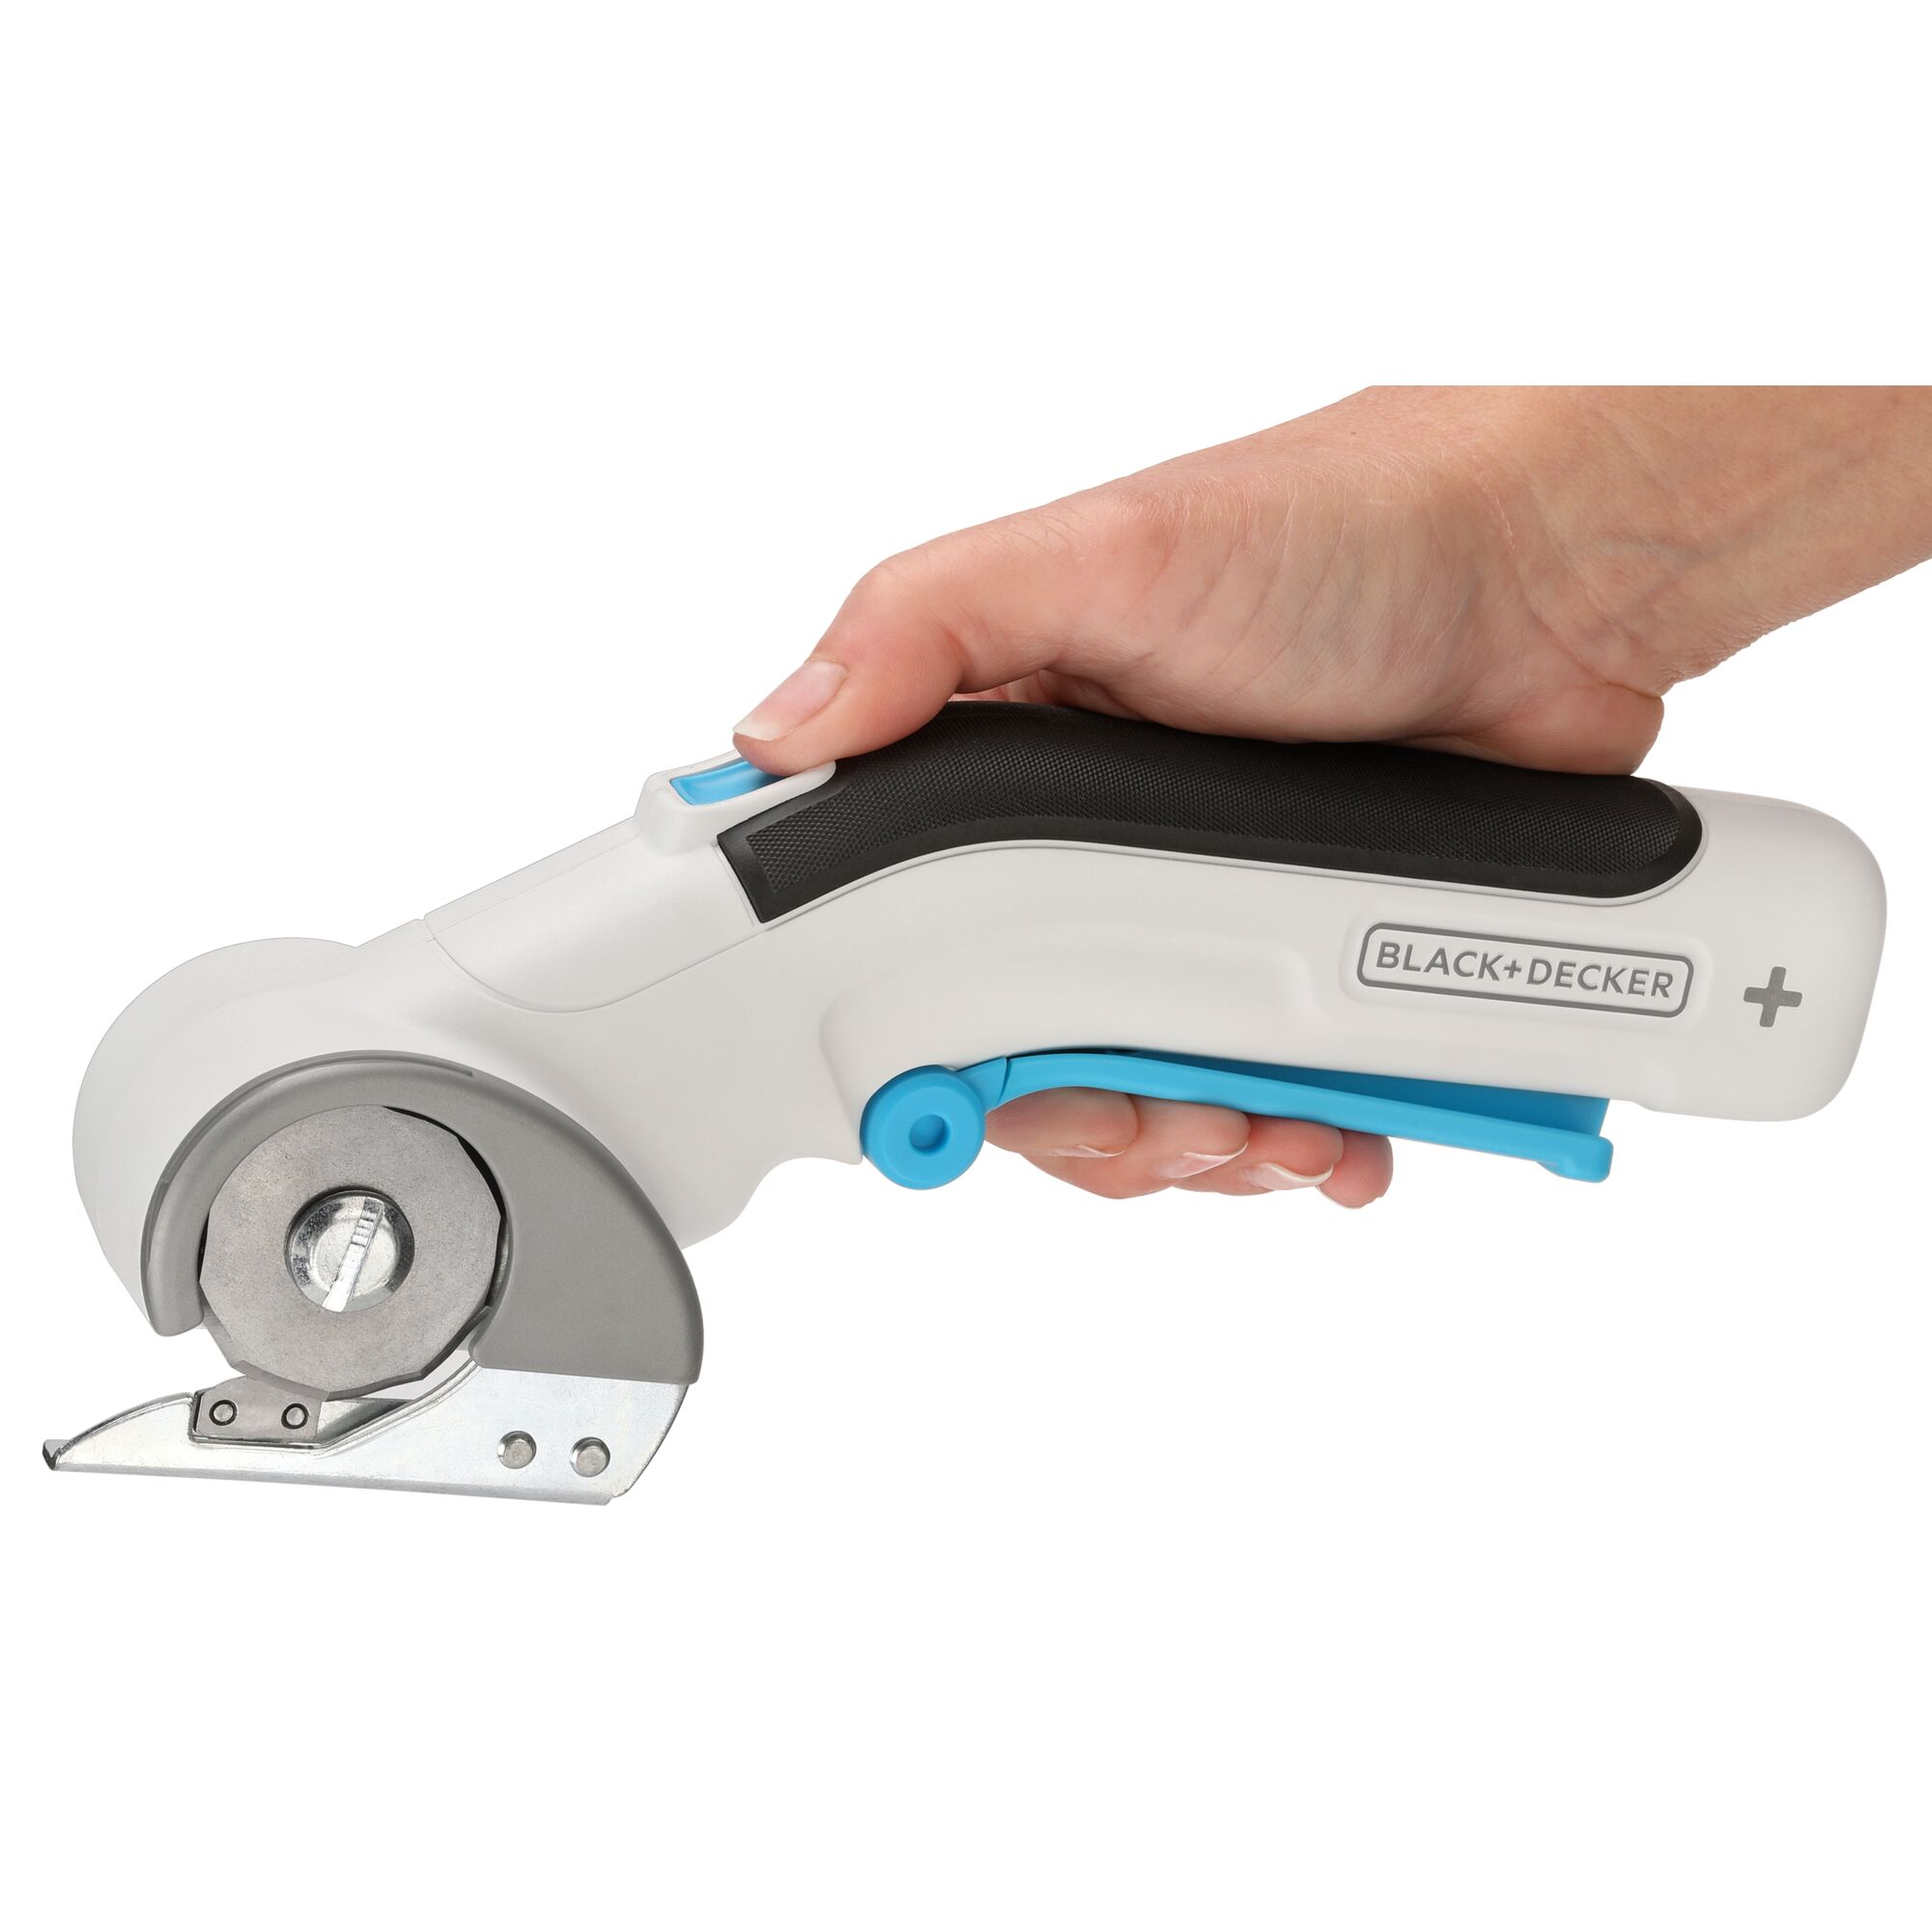 woman holding BLACK+DECKER cordless power rotary cutter with finger on safety lock